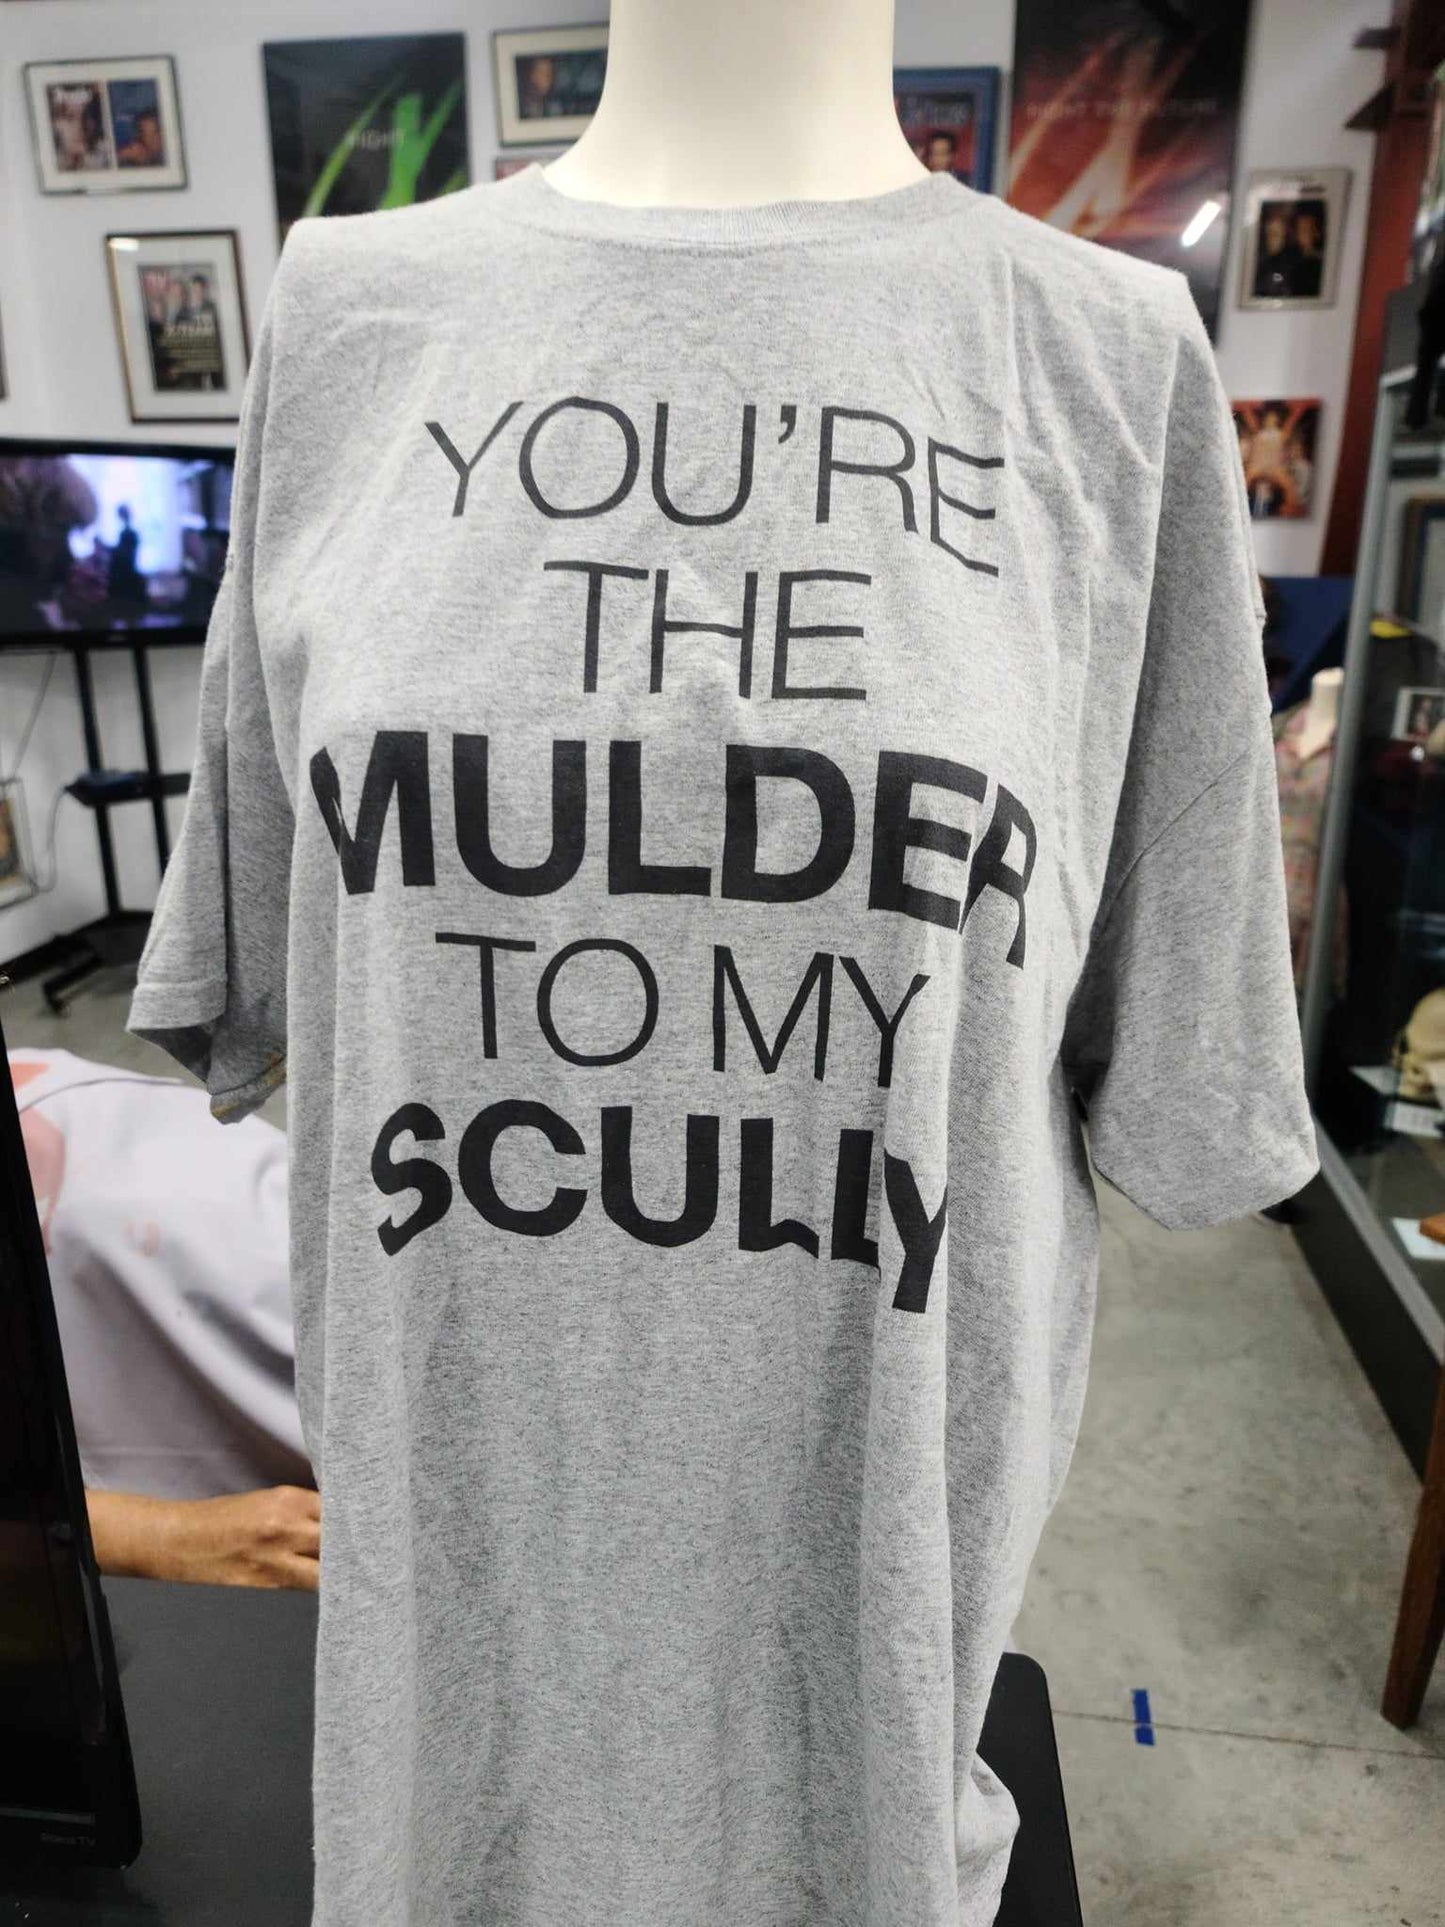 The X-Files -Your the Mulder to my Scully Shirt